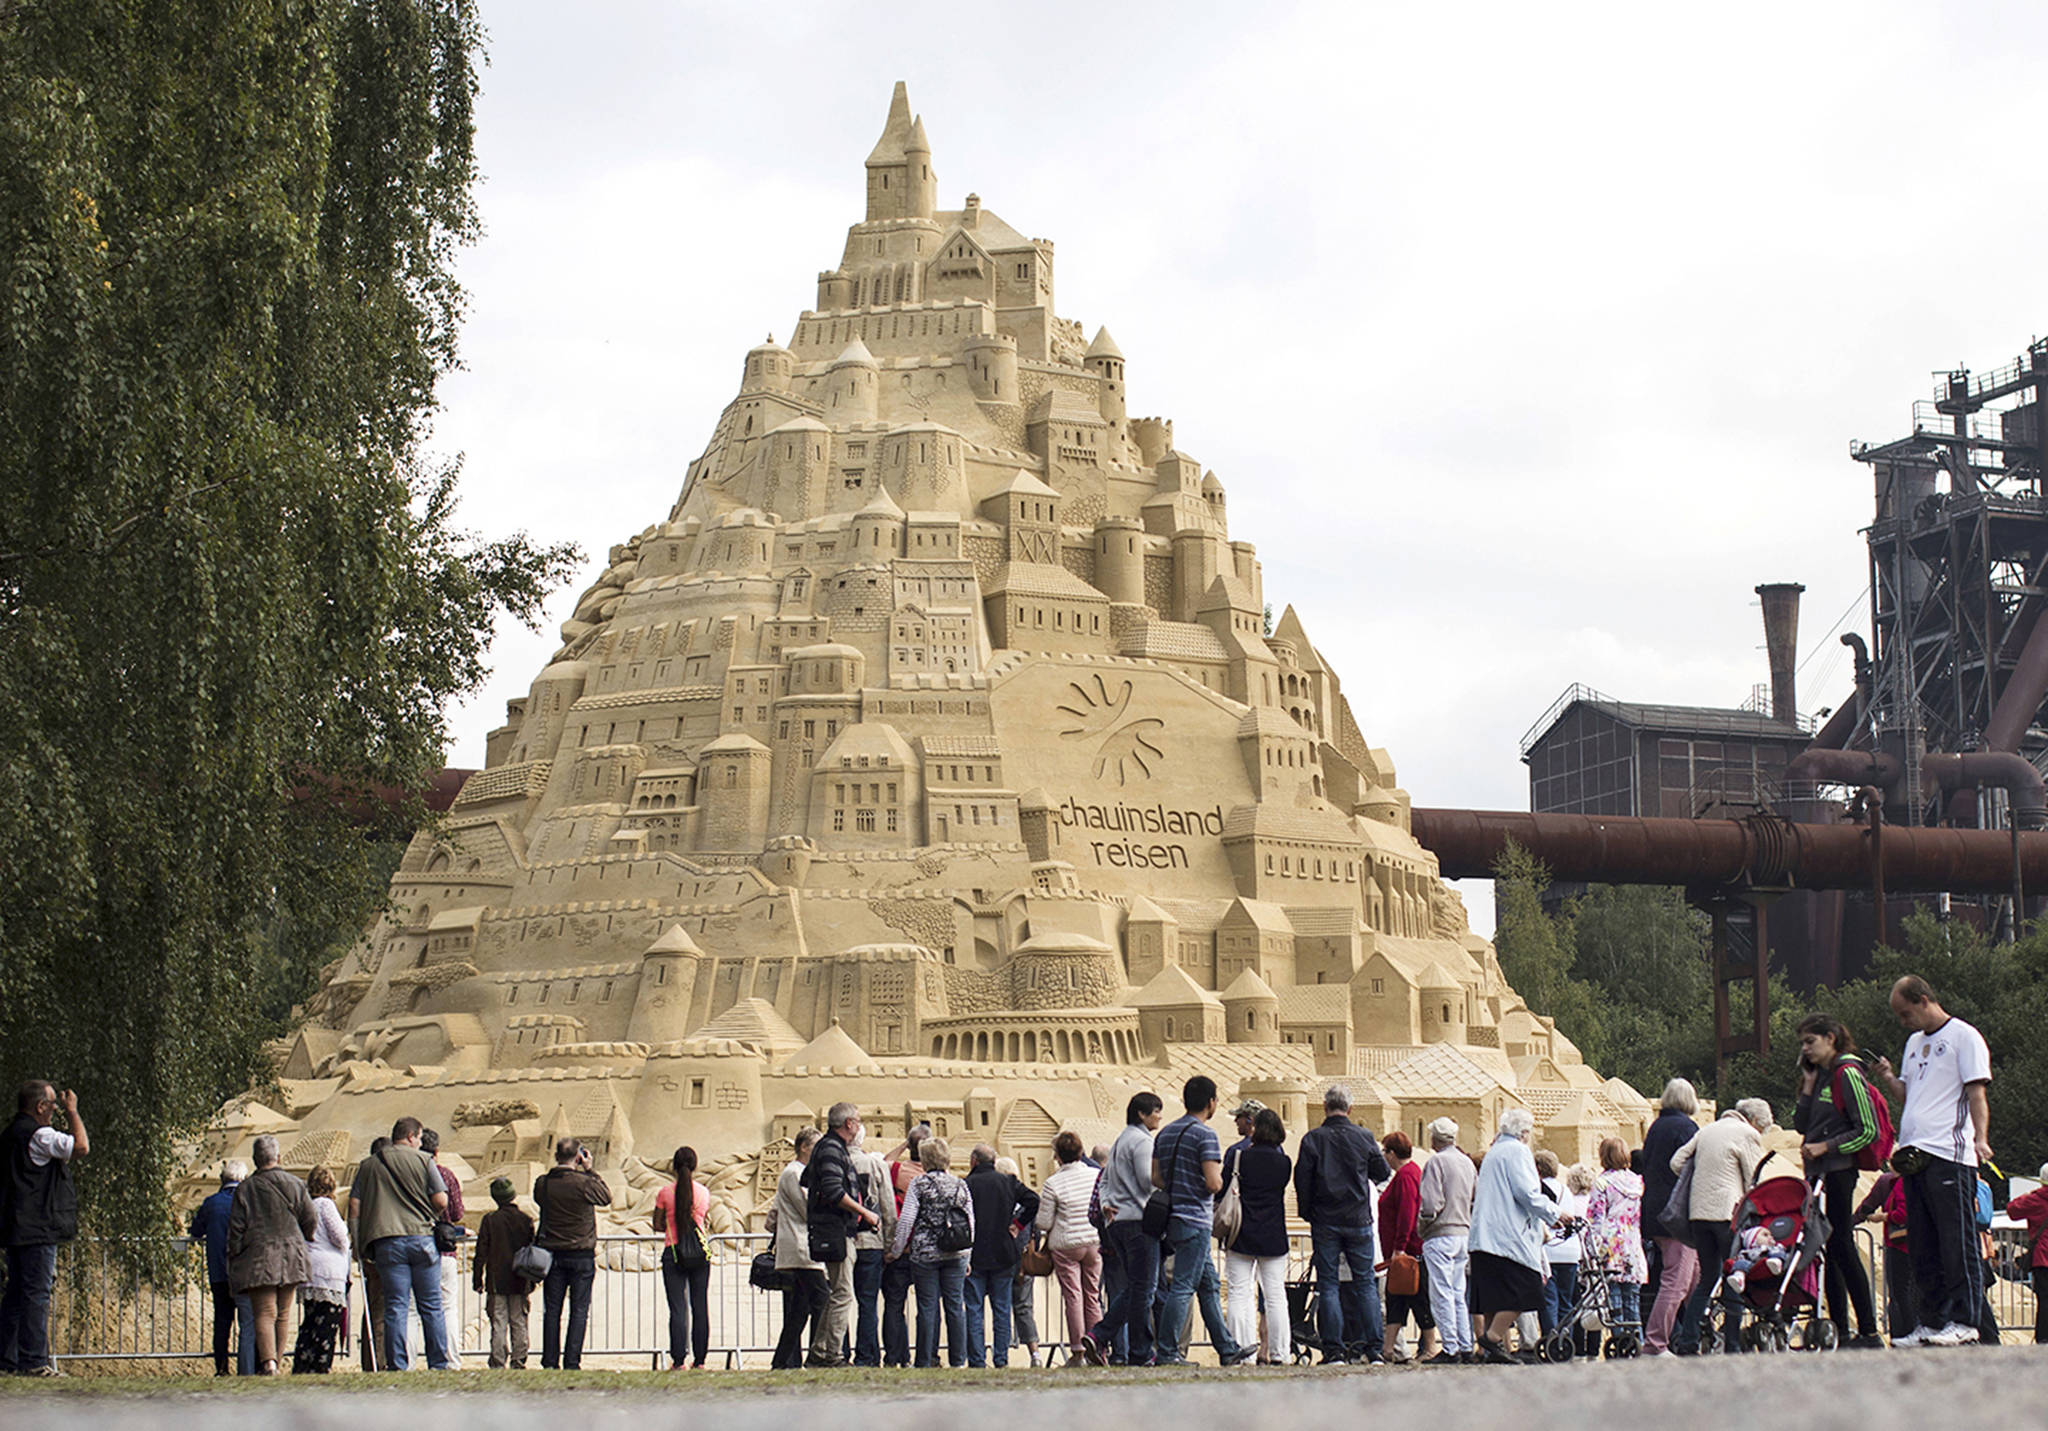 Visitors surround a sandcastle at the Landschaftspark in Duisburg, Germany, on Friday. (Marcel Kusch/dpa via AP)